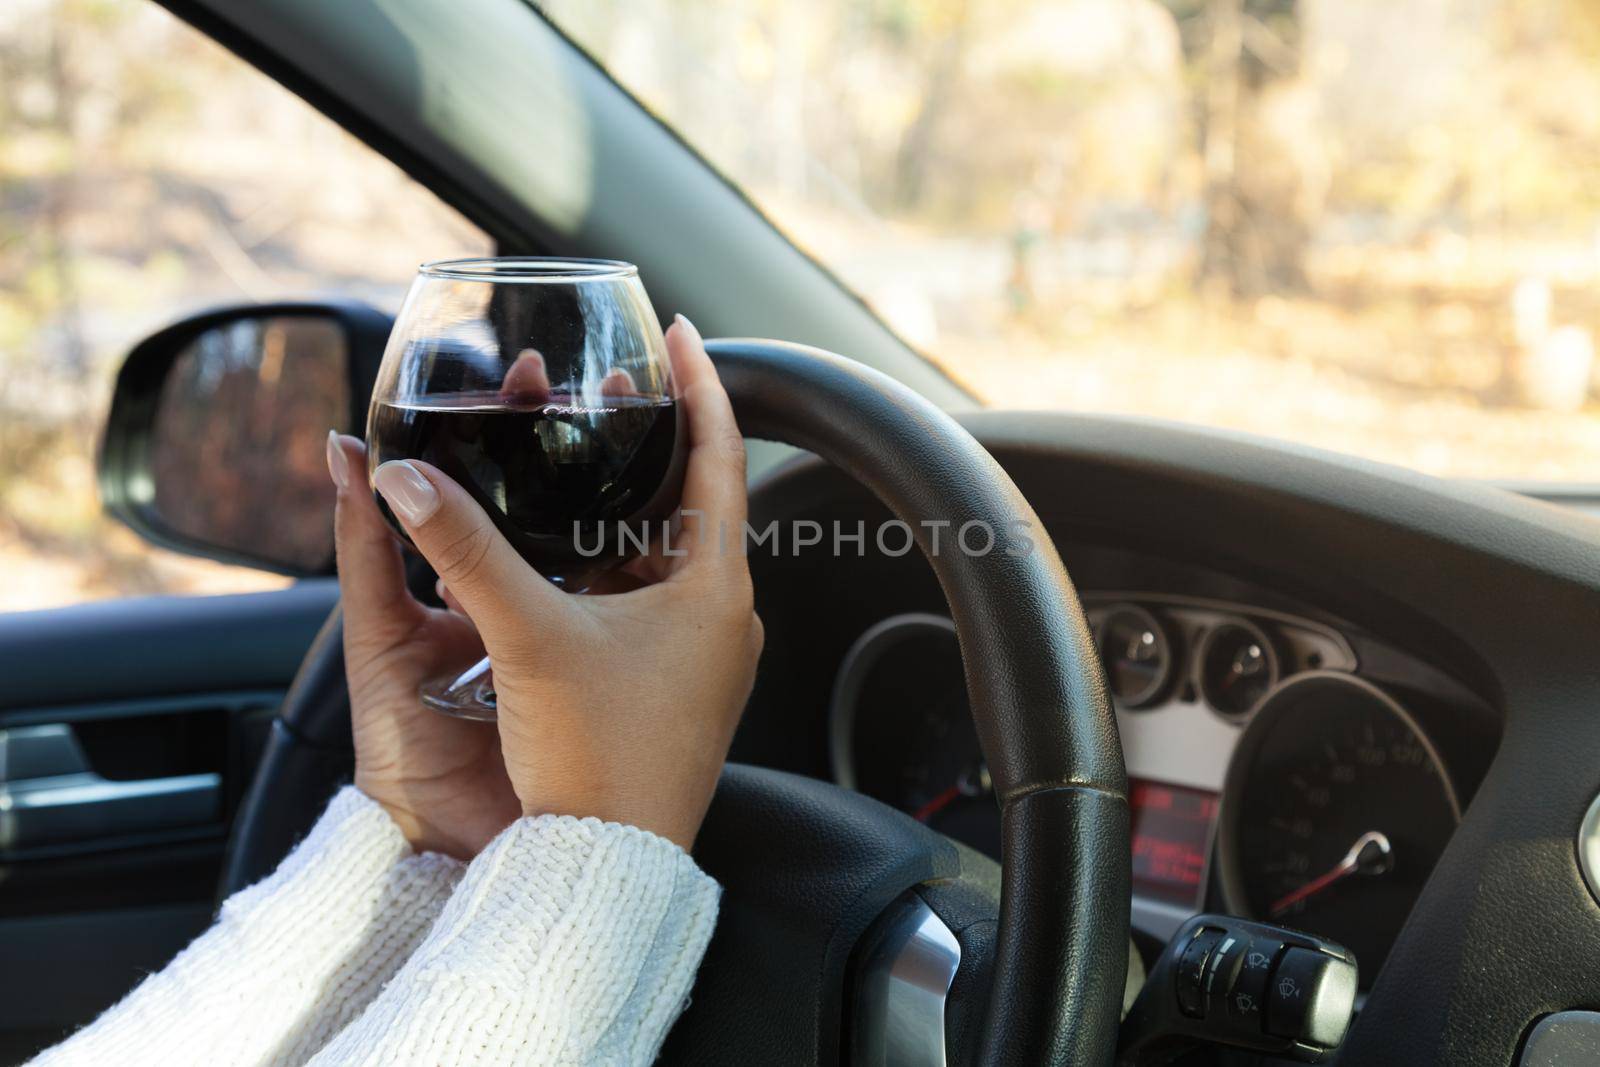 The girl at the wheel is drinking alcohol. Not sober revival is a threat to people.